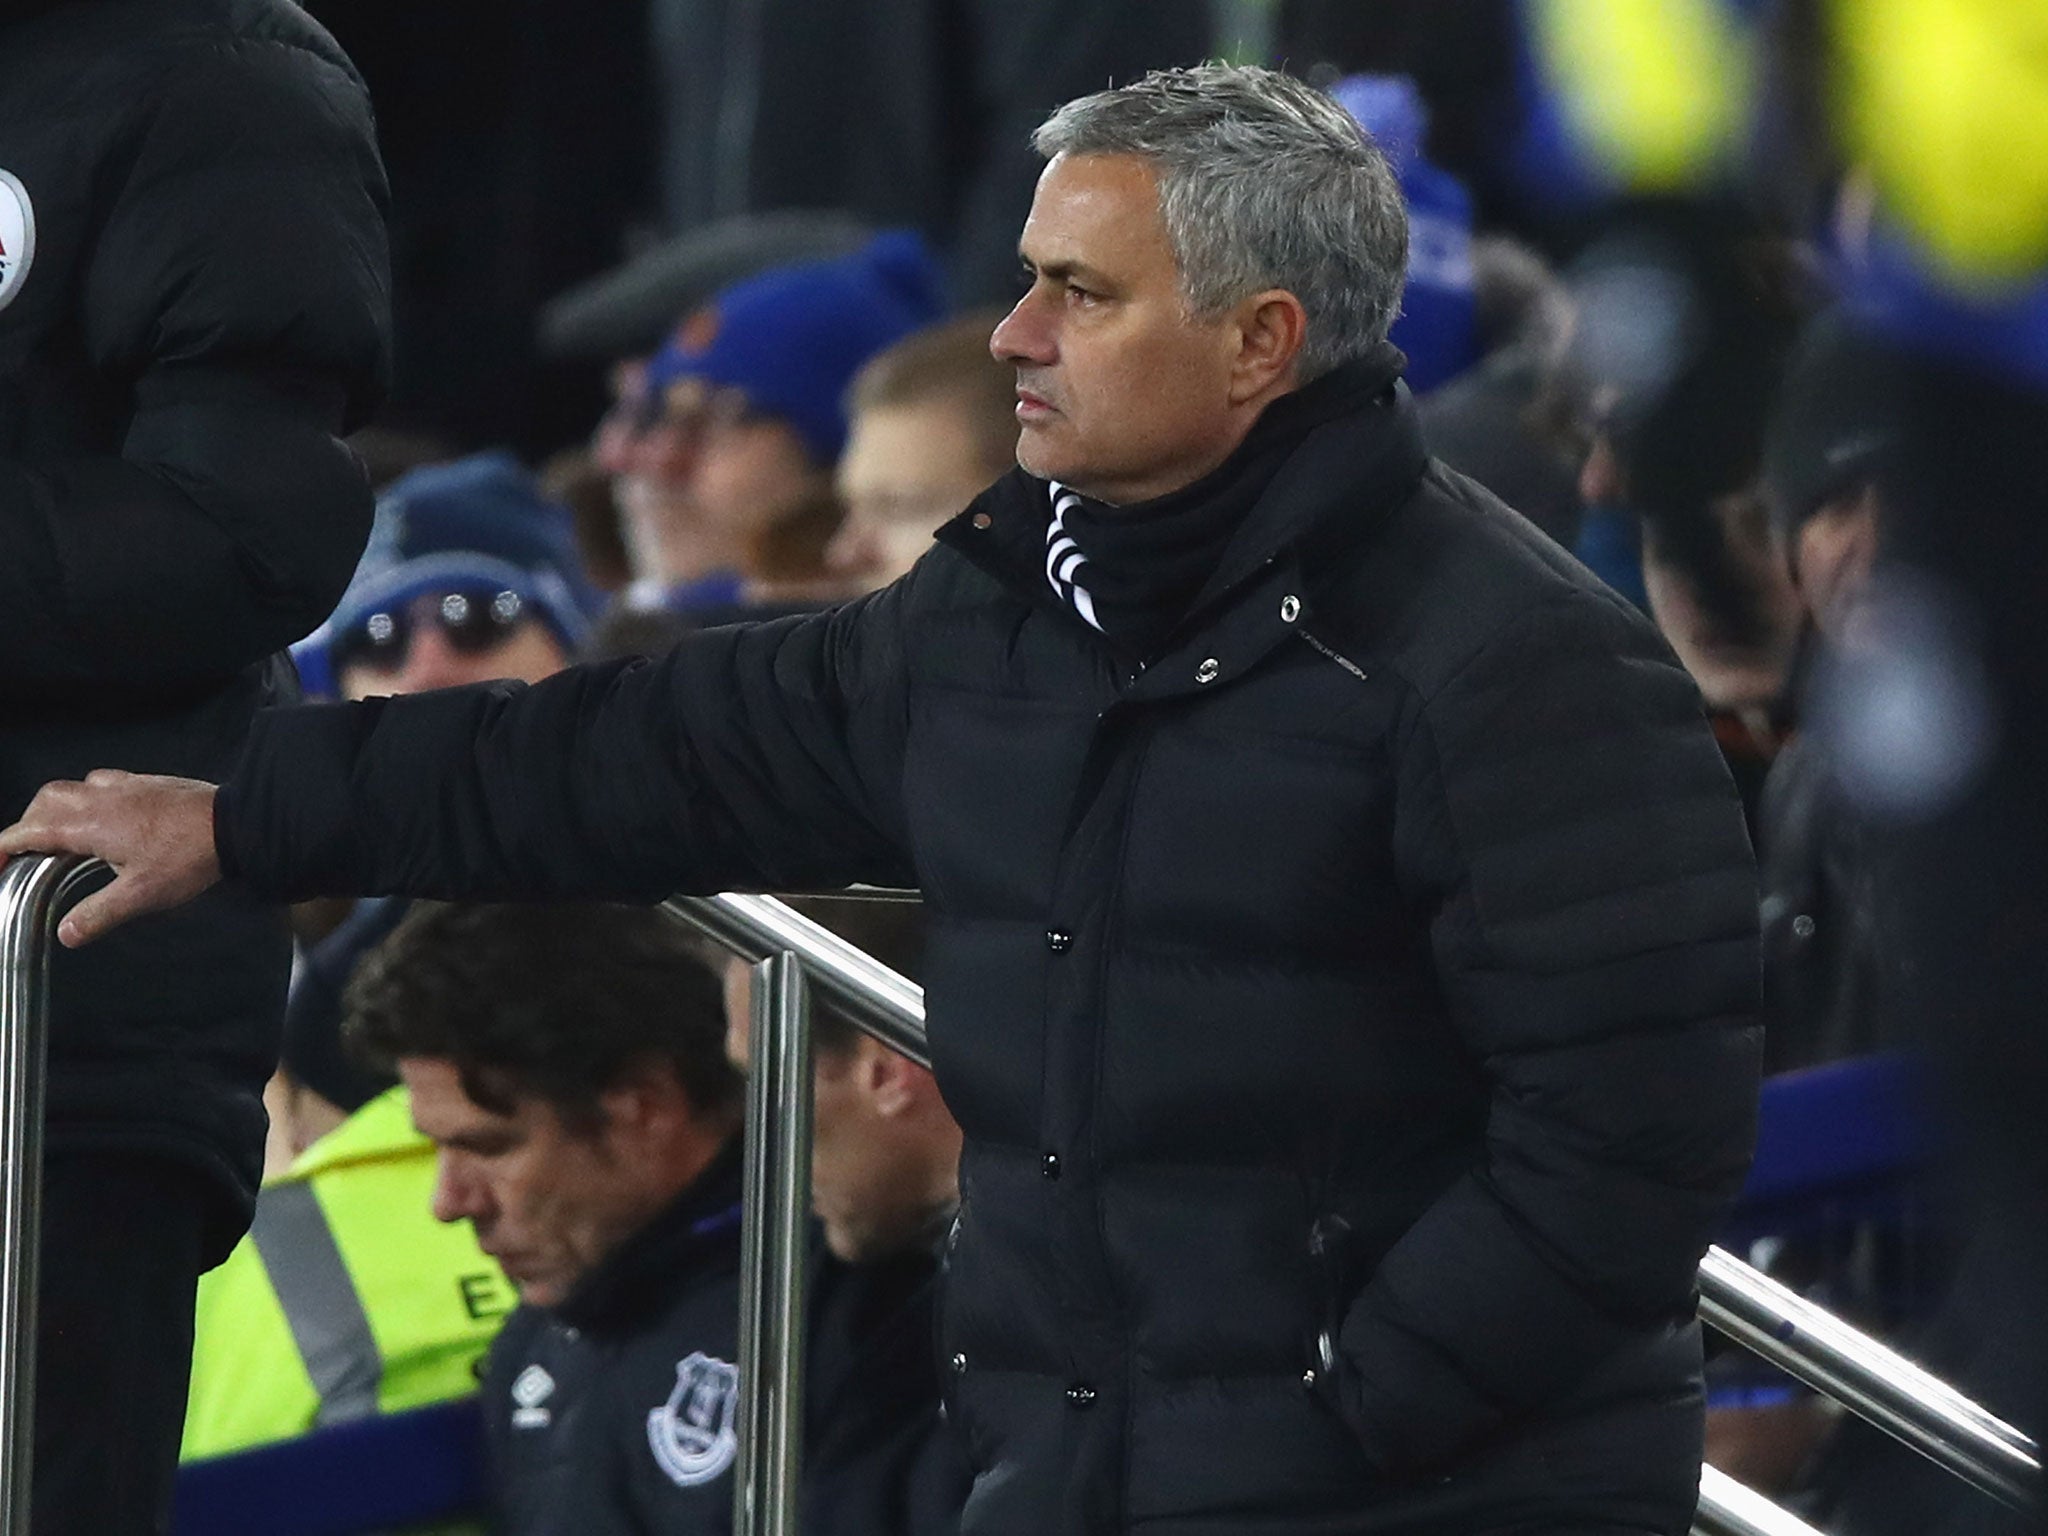 Jose Mourinho was in no mood to ask the press's questions after the game at Goodison Park